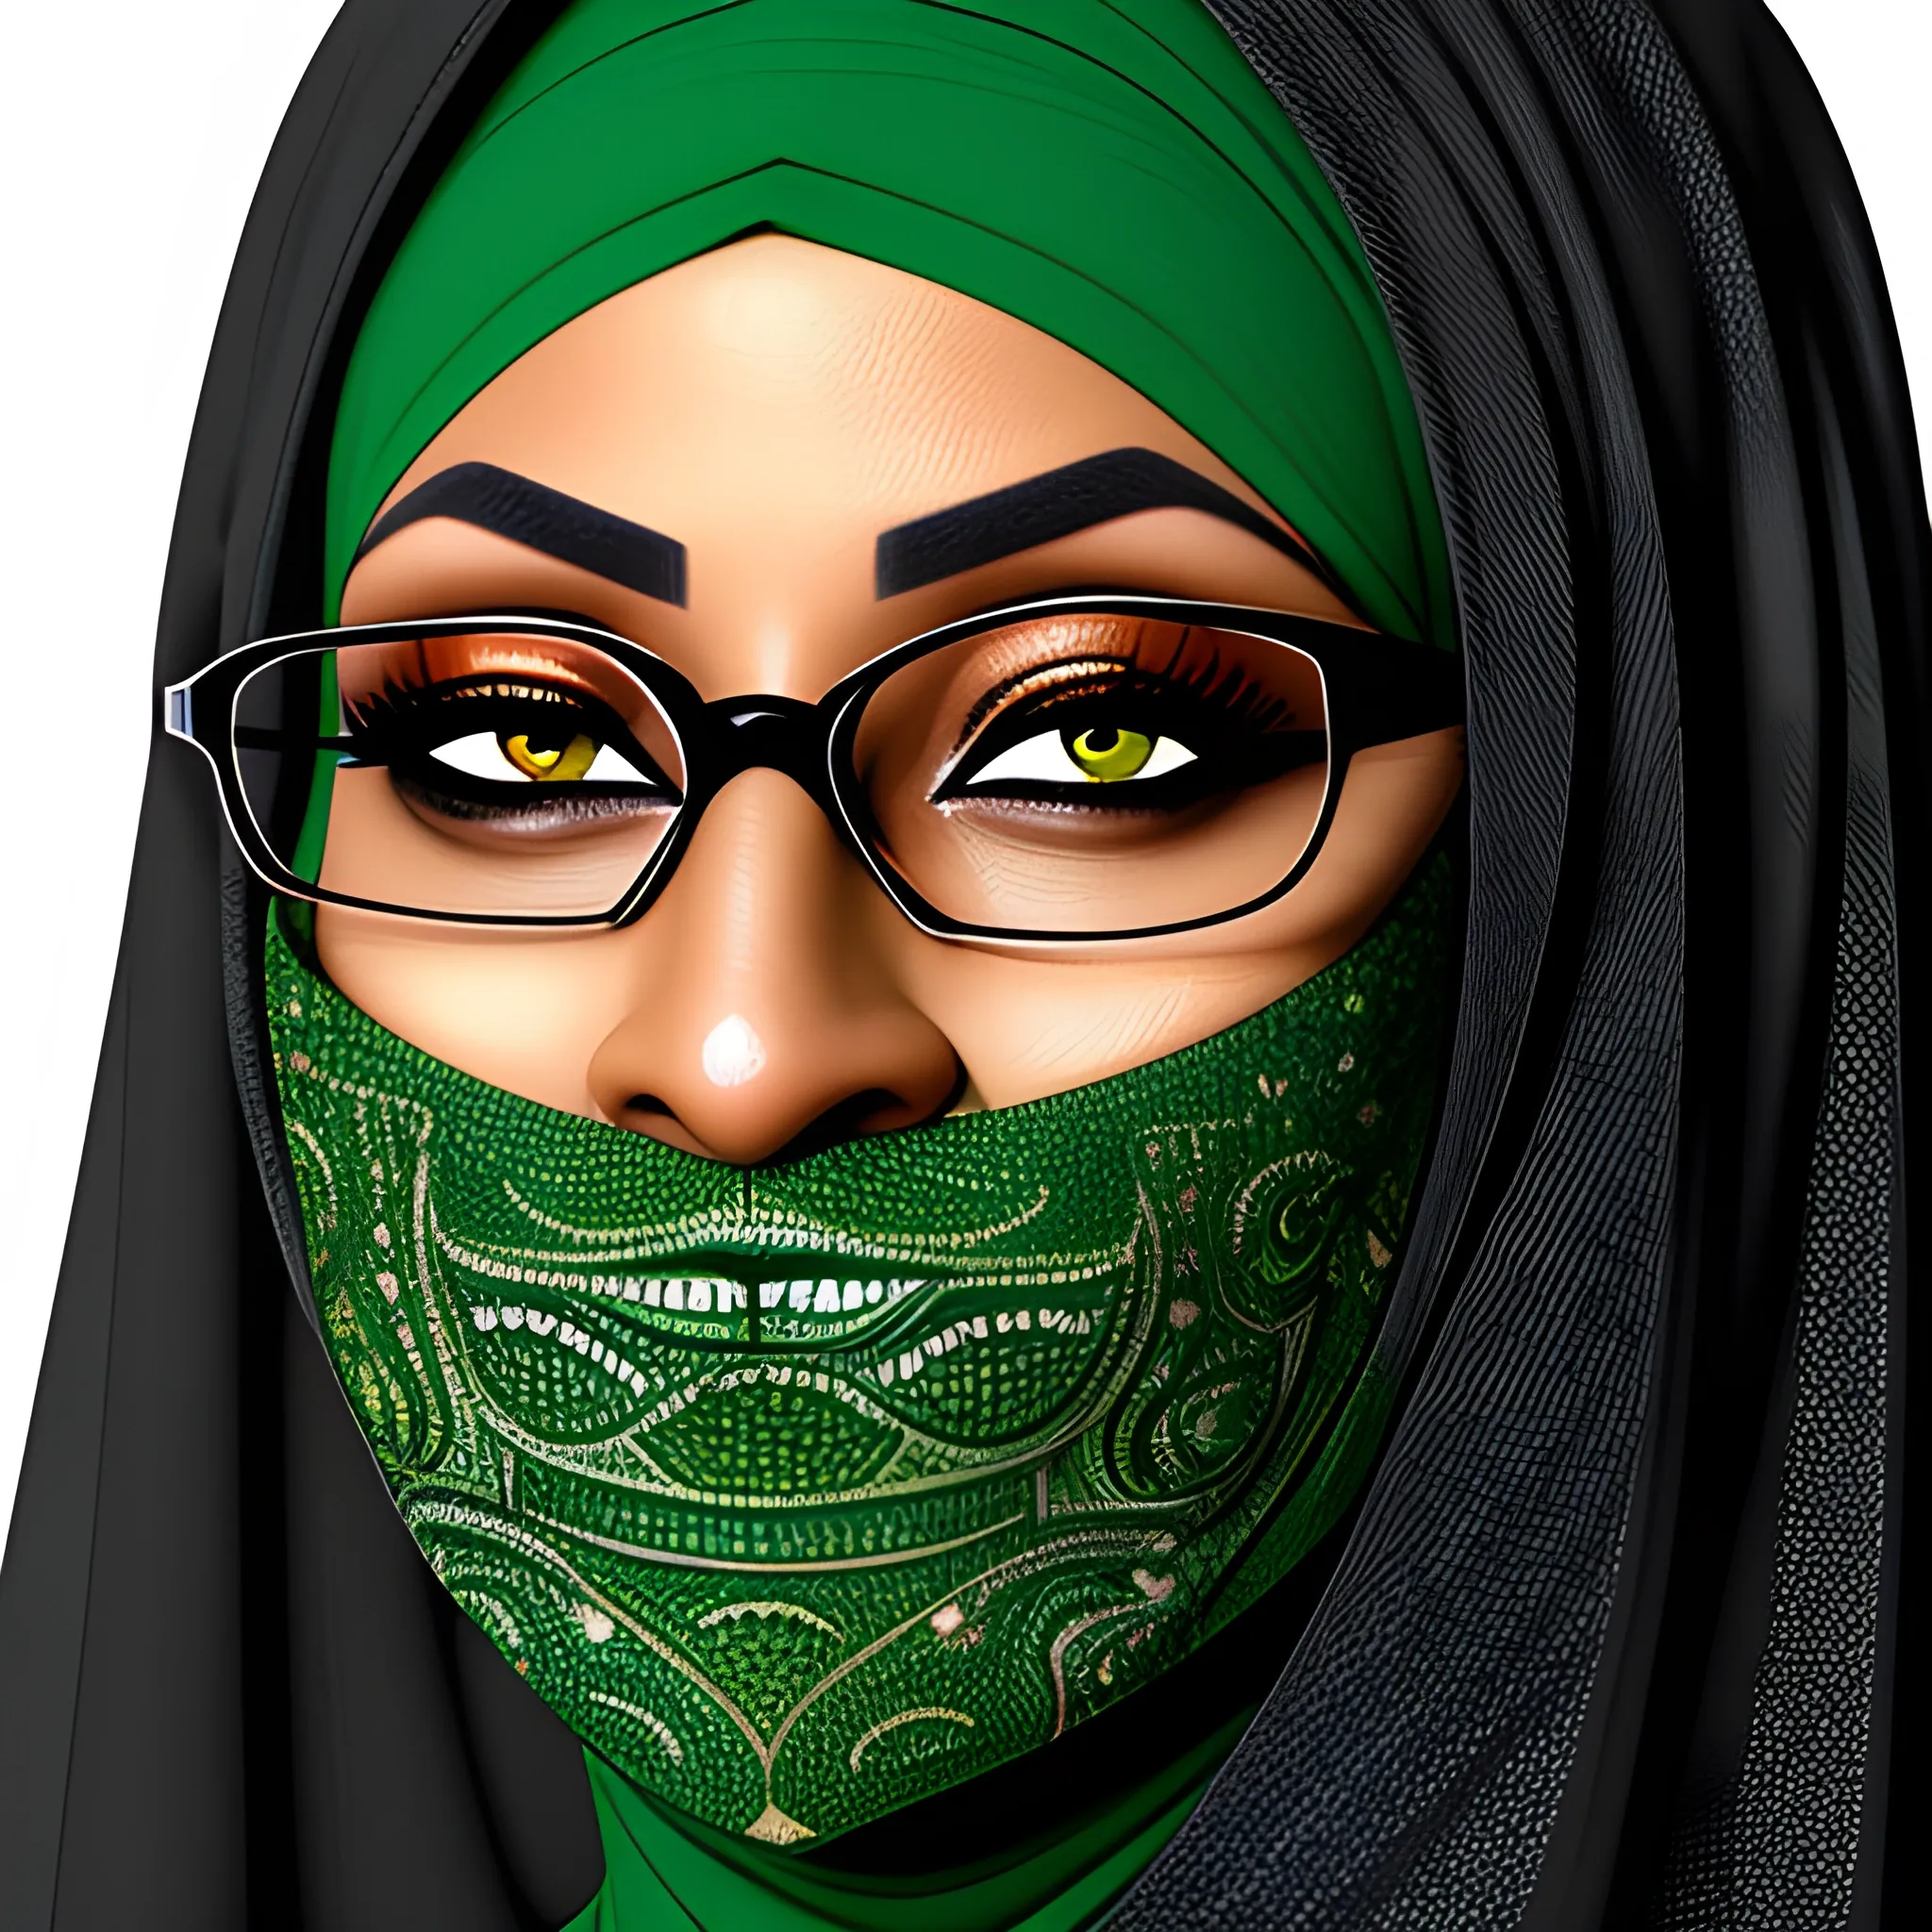 African women, long oval face, dimple chin, small eyes, high bridge nose, thick lips, wearing green hijab, black abaya, half circle black eye glass.  Realistic highly detailed portrait picture. ,Romanticism